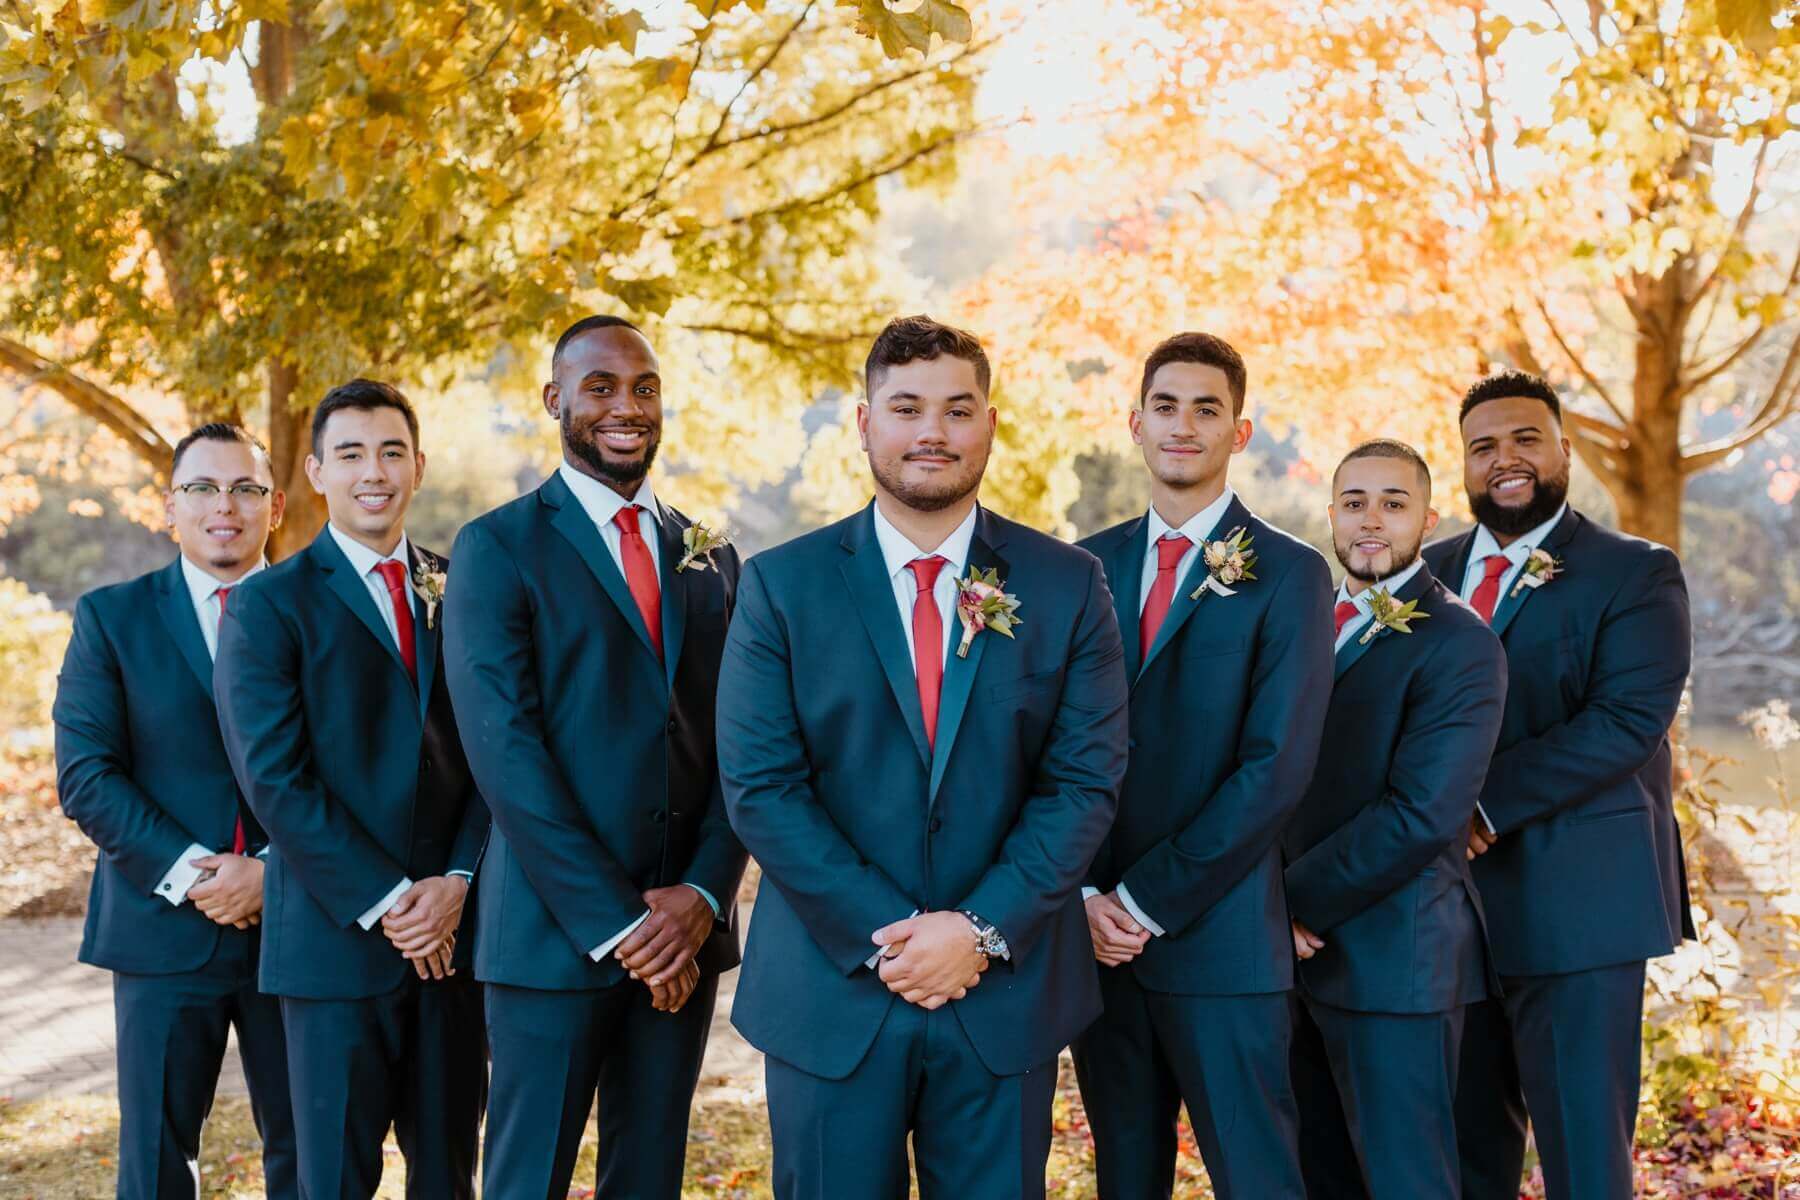 Groom with groomsmen in navy blue suits with red ties